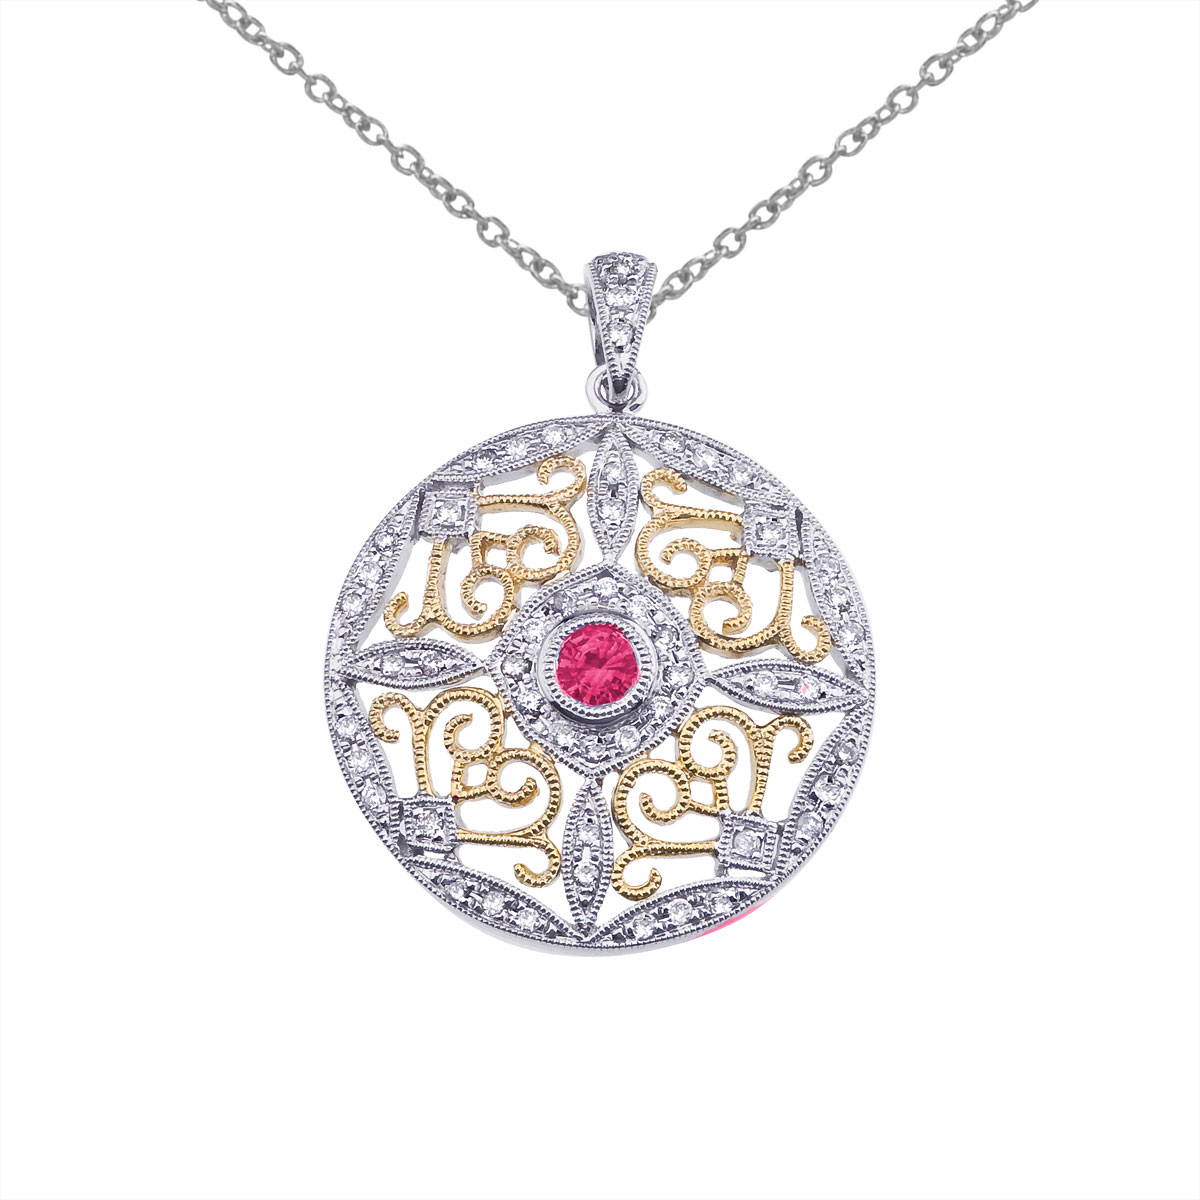 JCX2585: This pendant features a beautiful and intricate 14k two tone gold filigree design with a 4 mm ruby and .31 total ct diamonds.